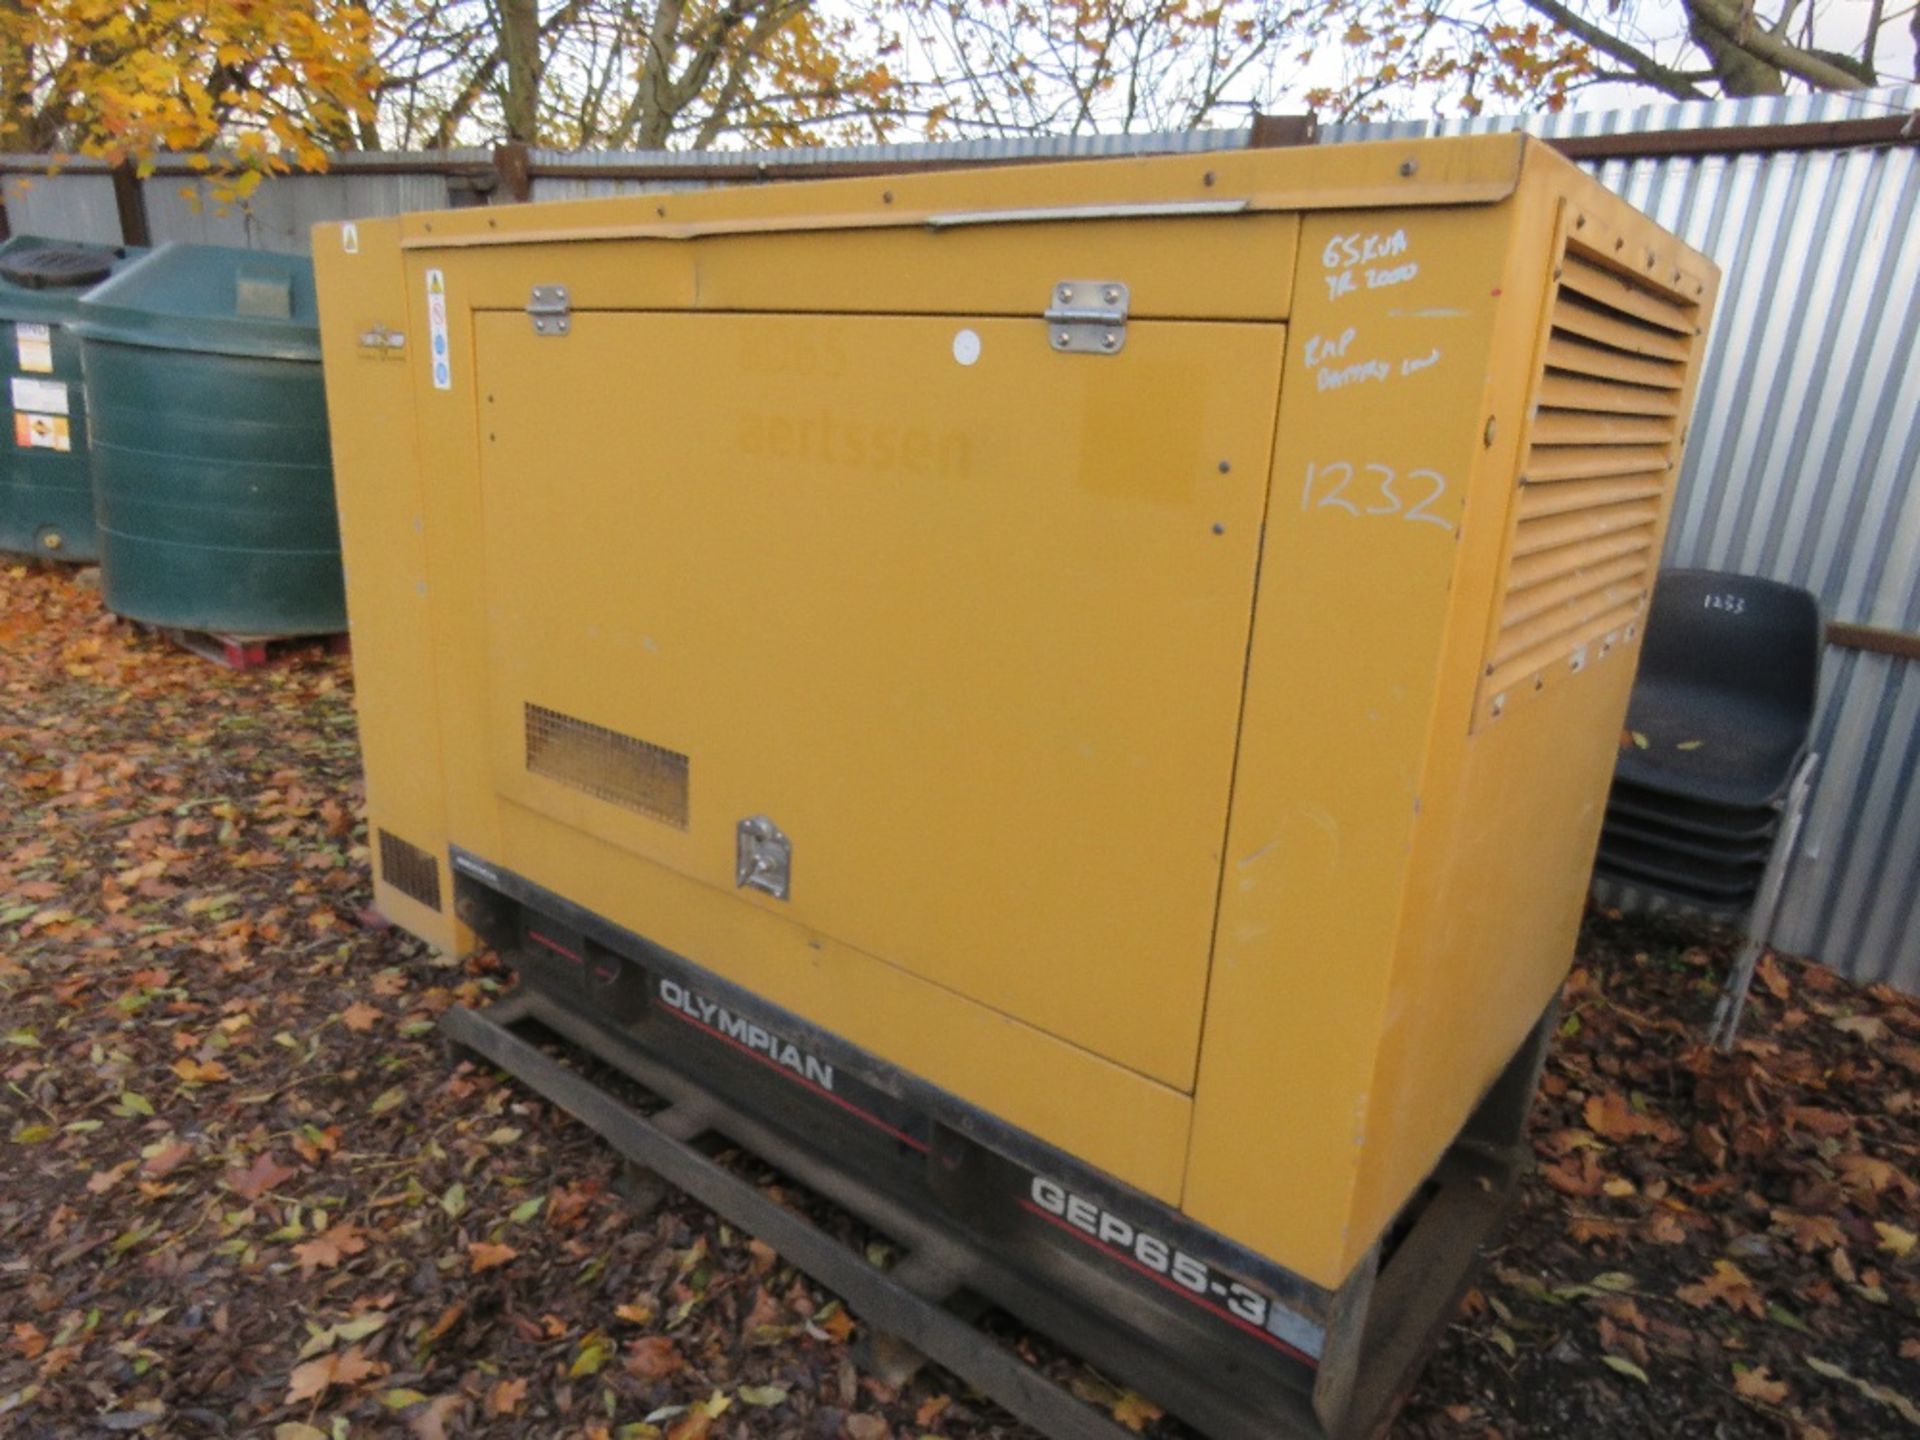 OLYMPIAN 65KVA SILENCED GENERATOR. MODEL GEP65-3, YEAR 2000. PERKINS ENGINE (BELIEVED TO HAVE BEEN R